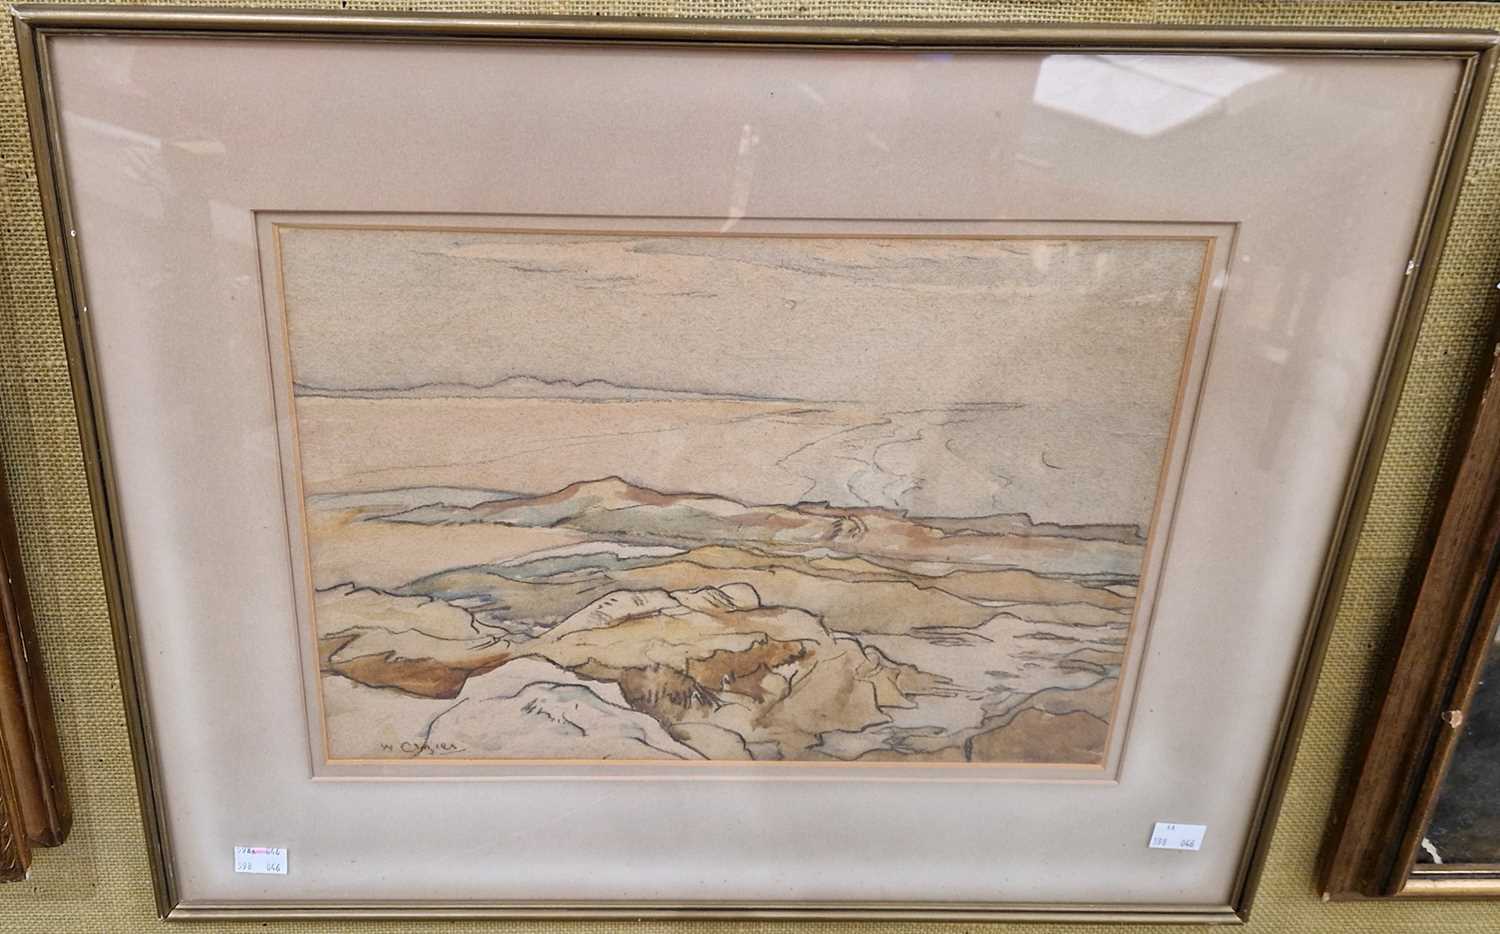 William Crozier ARSA (1897-1930) Incoming, St Andrews watercolour, signed lower left, inscribed